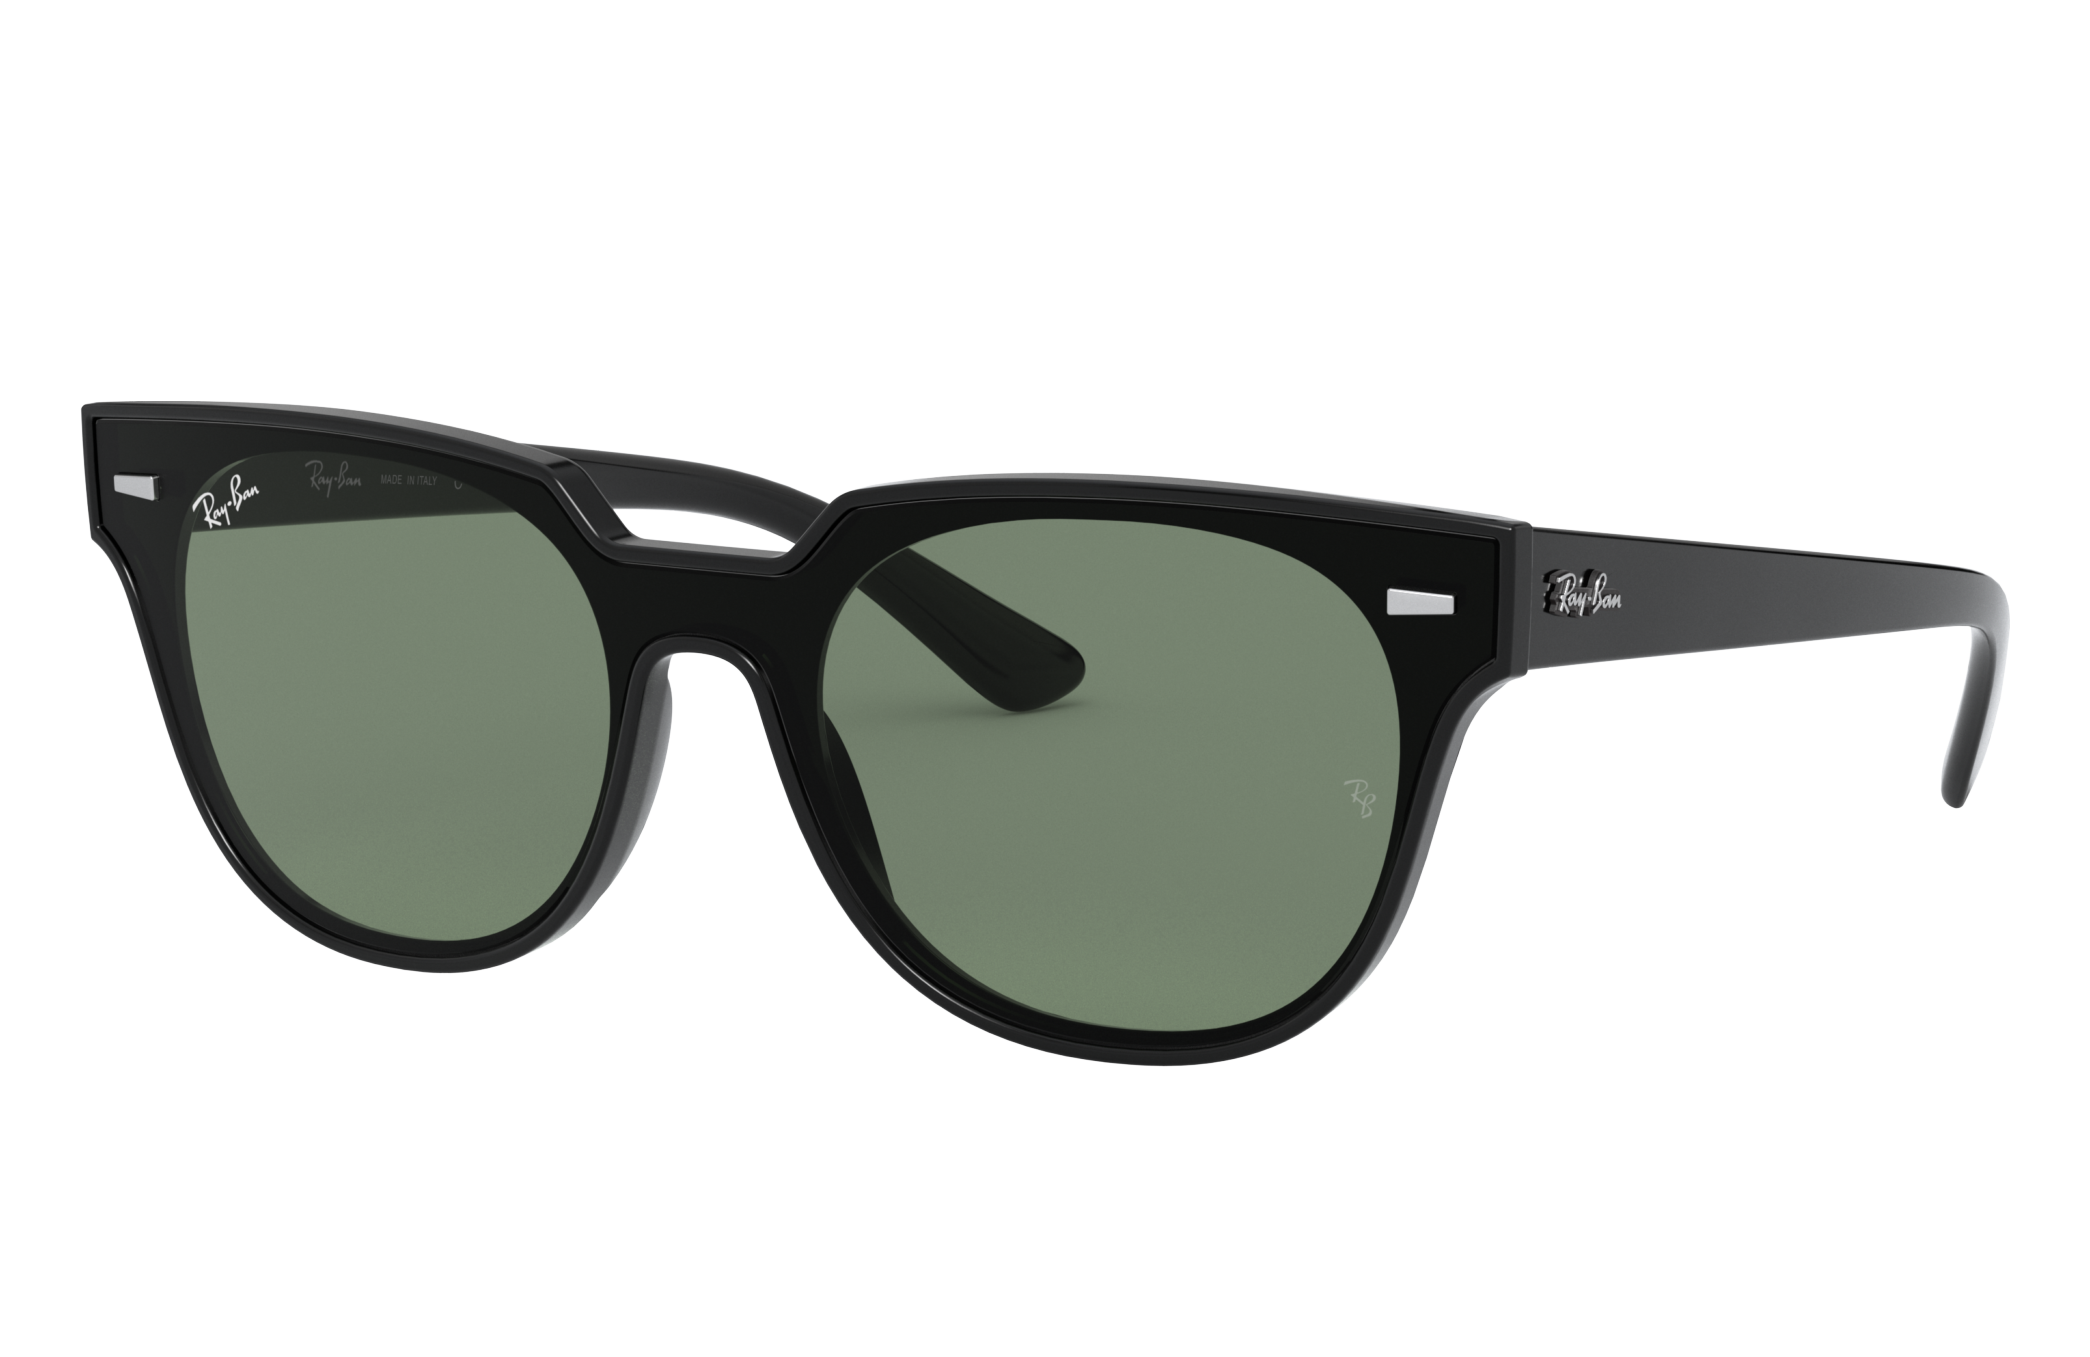 Blaze Meteor Sunglasses in Black and Green | Ray-Ban®